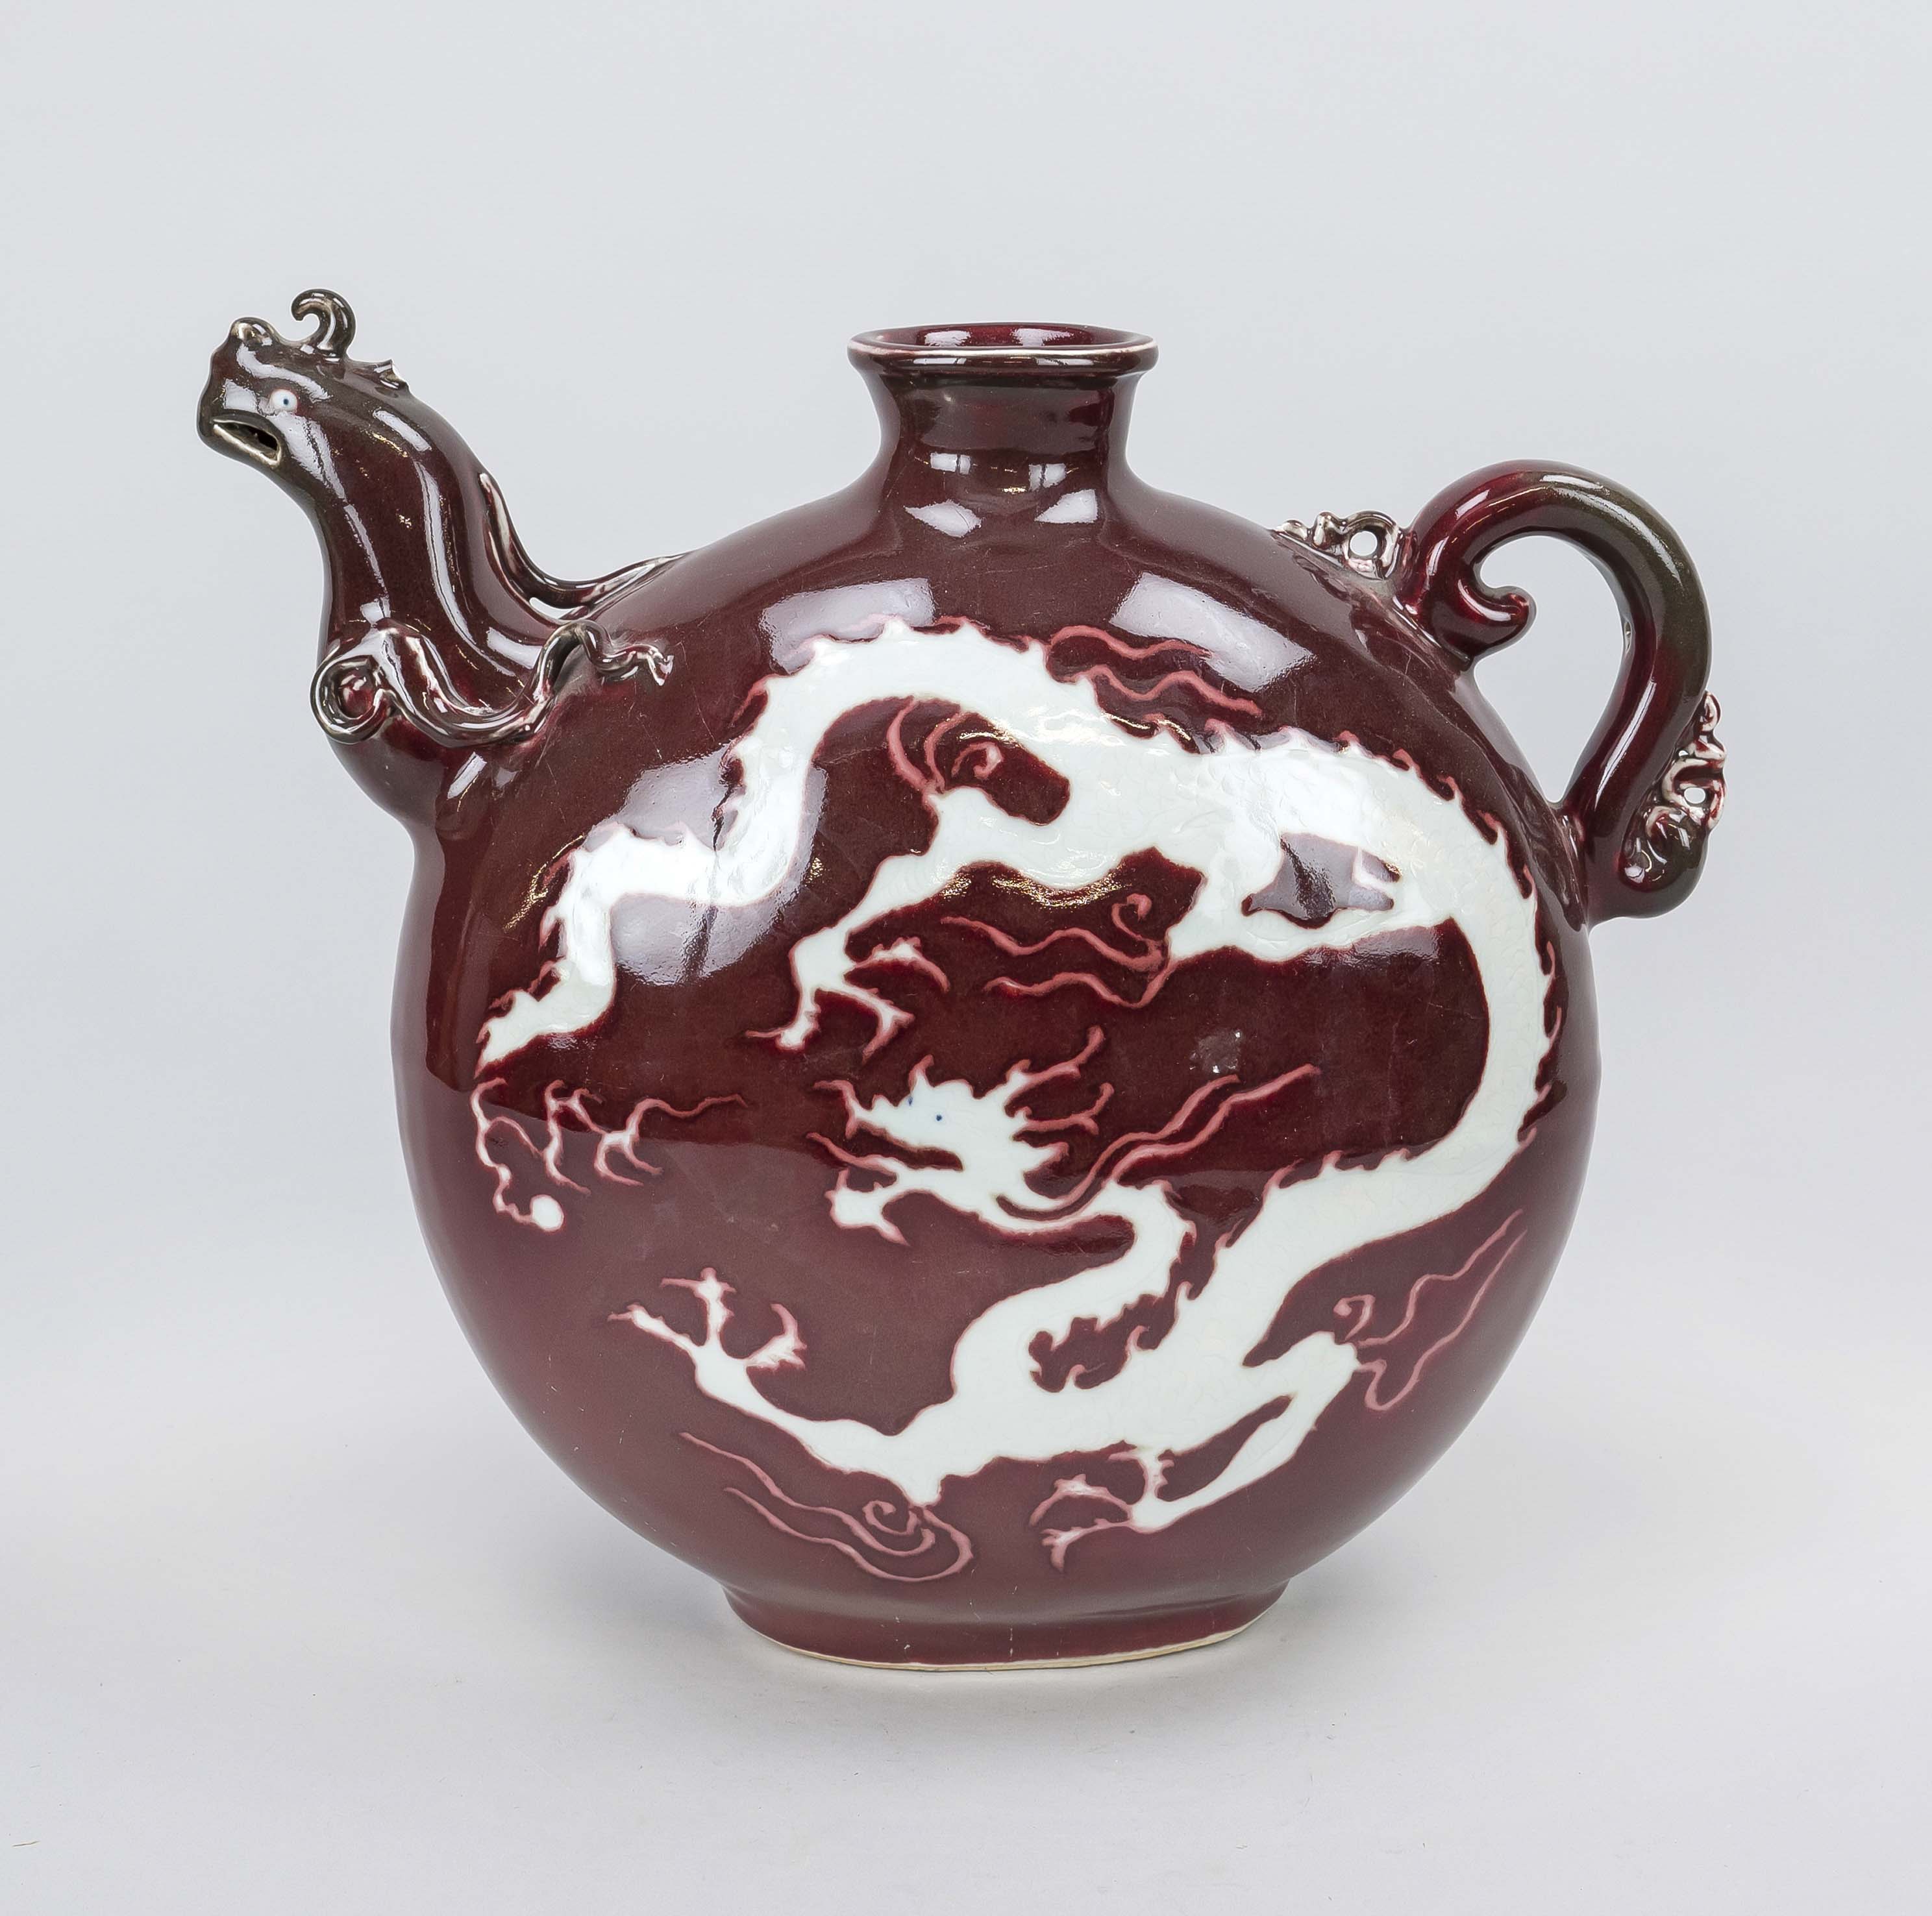 Copper-red ground jug with dragon decoration, China, 20th century Dragon as negative form with